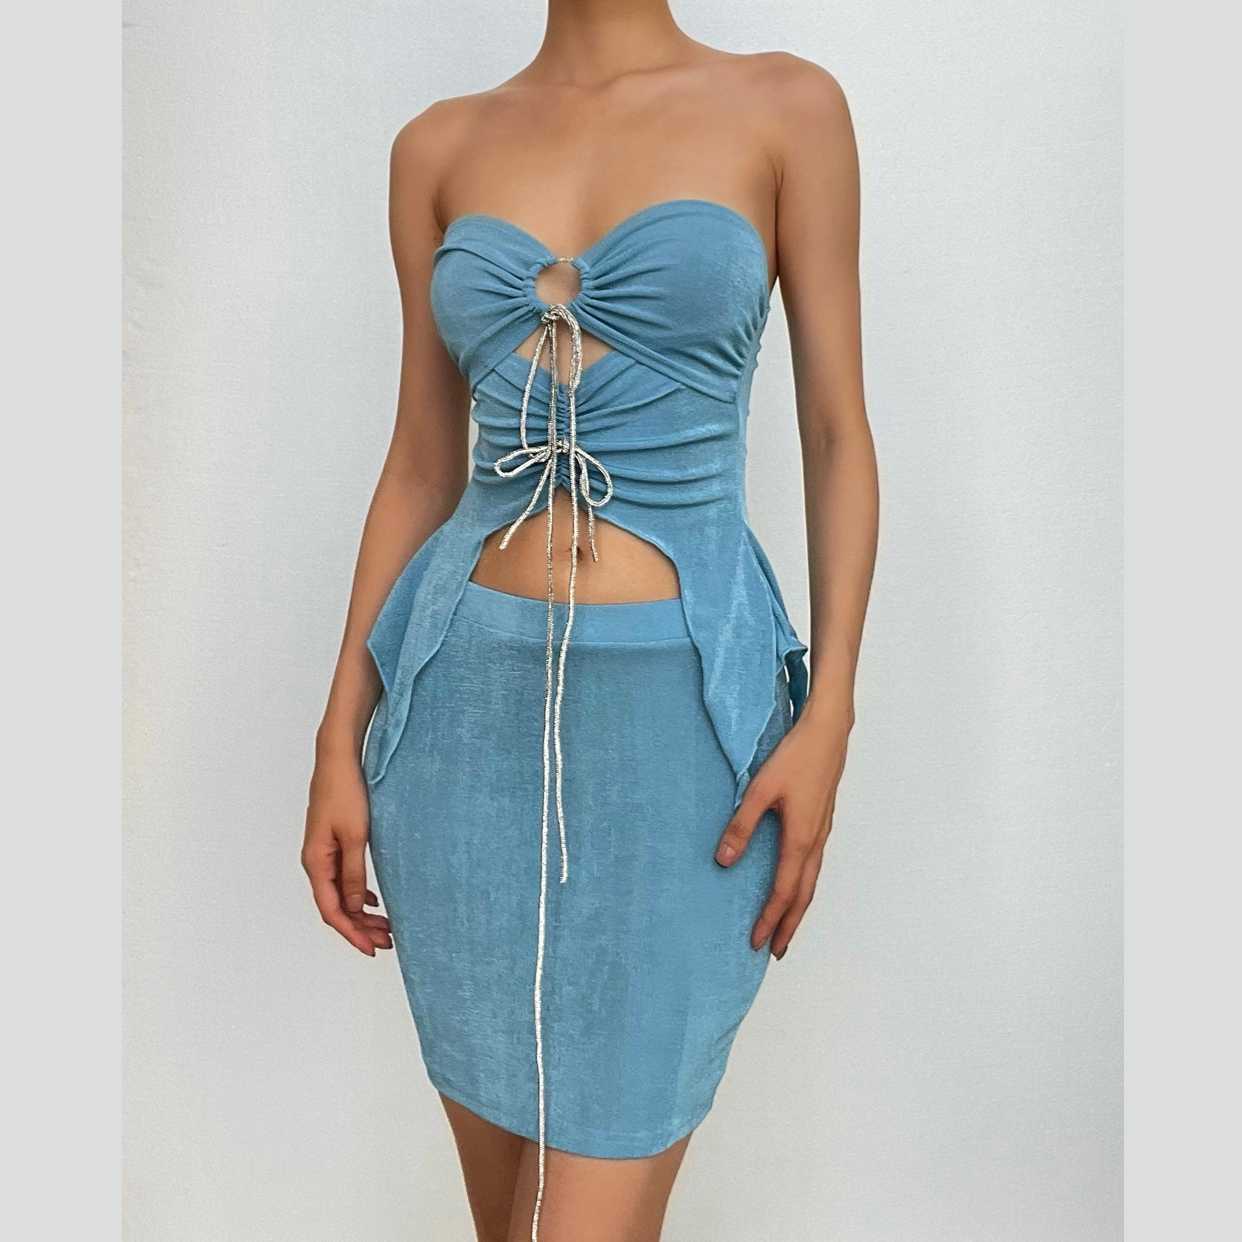 Cross front hollow out halter ruched backless mini skirt set